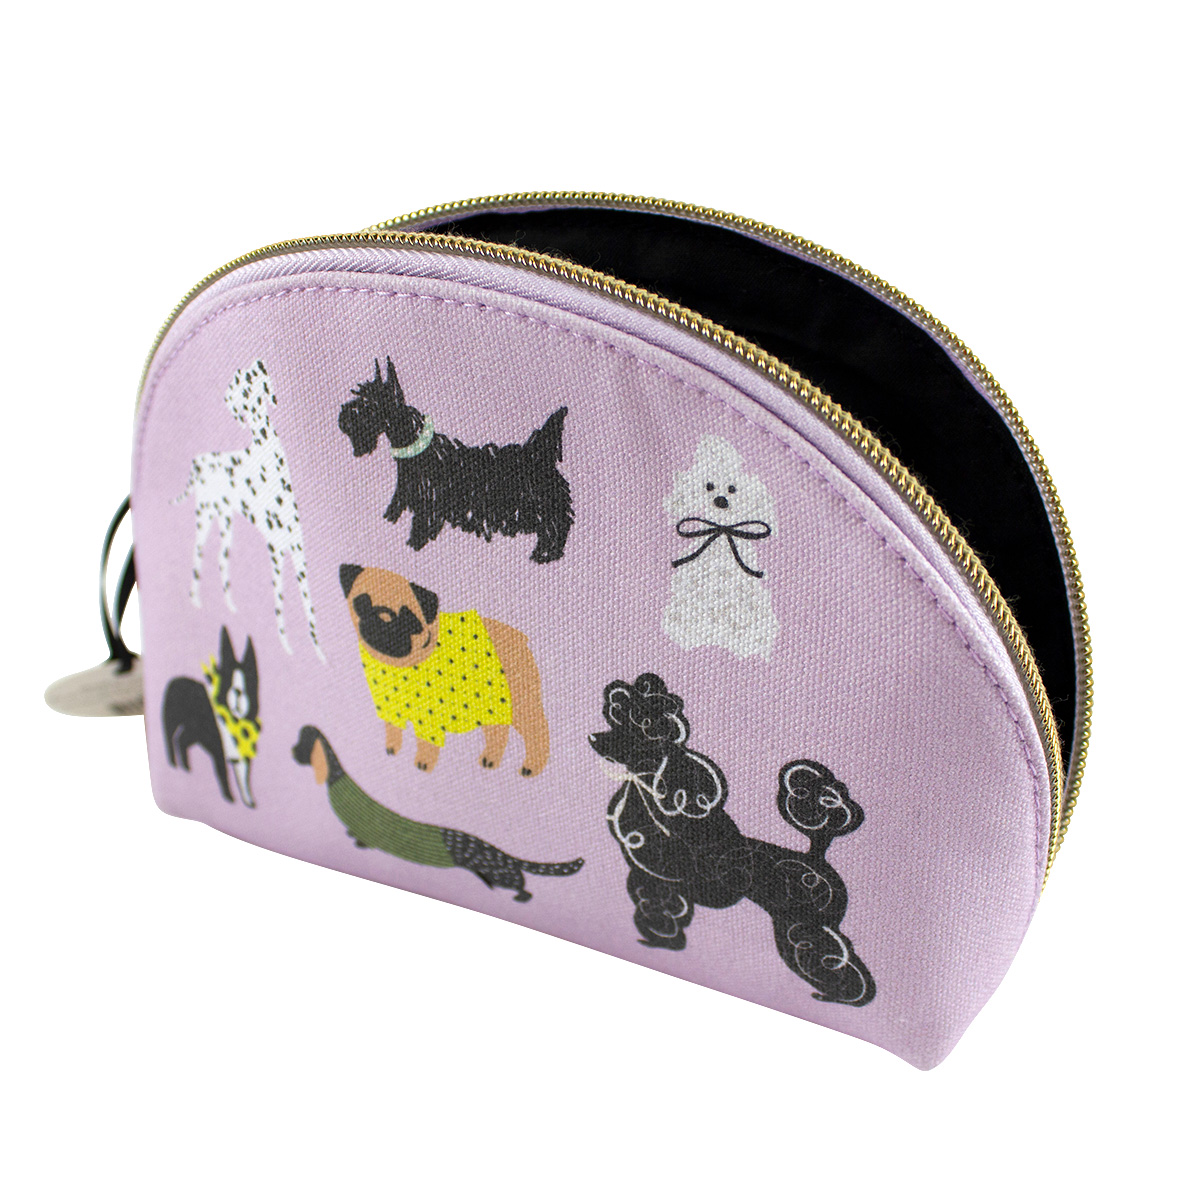 Sketched Dogs Zippered Bag - Medium Questions & Answers